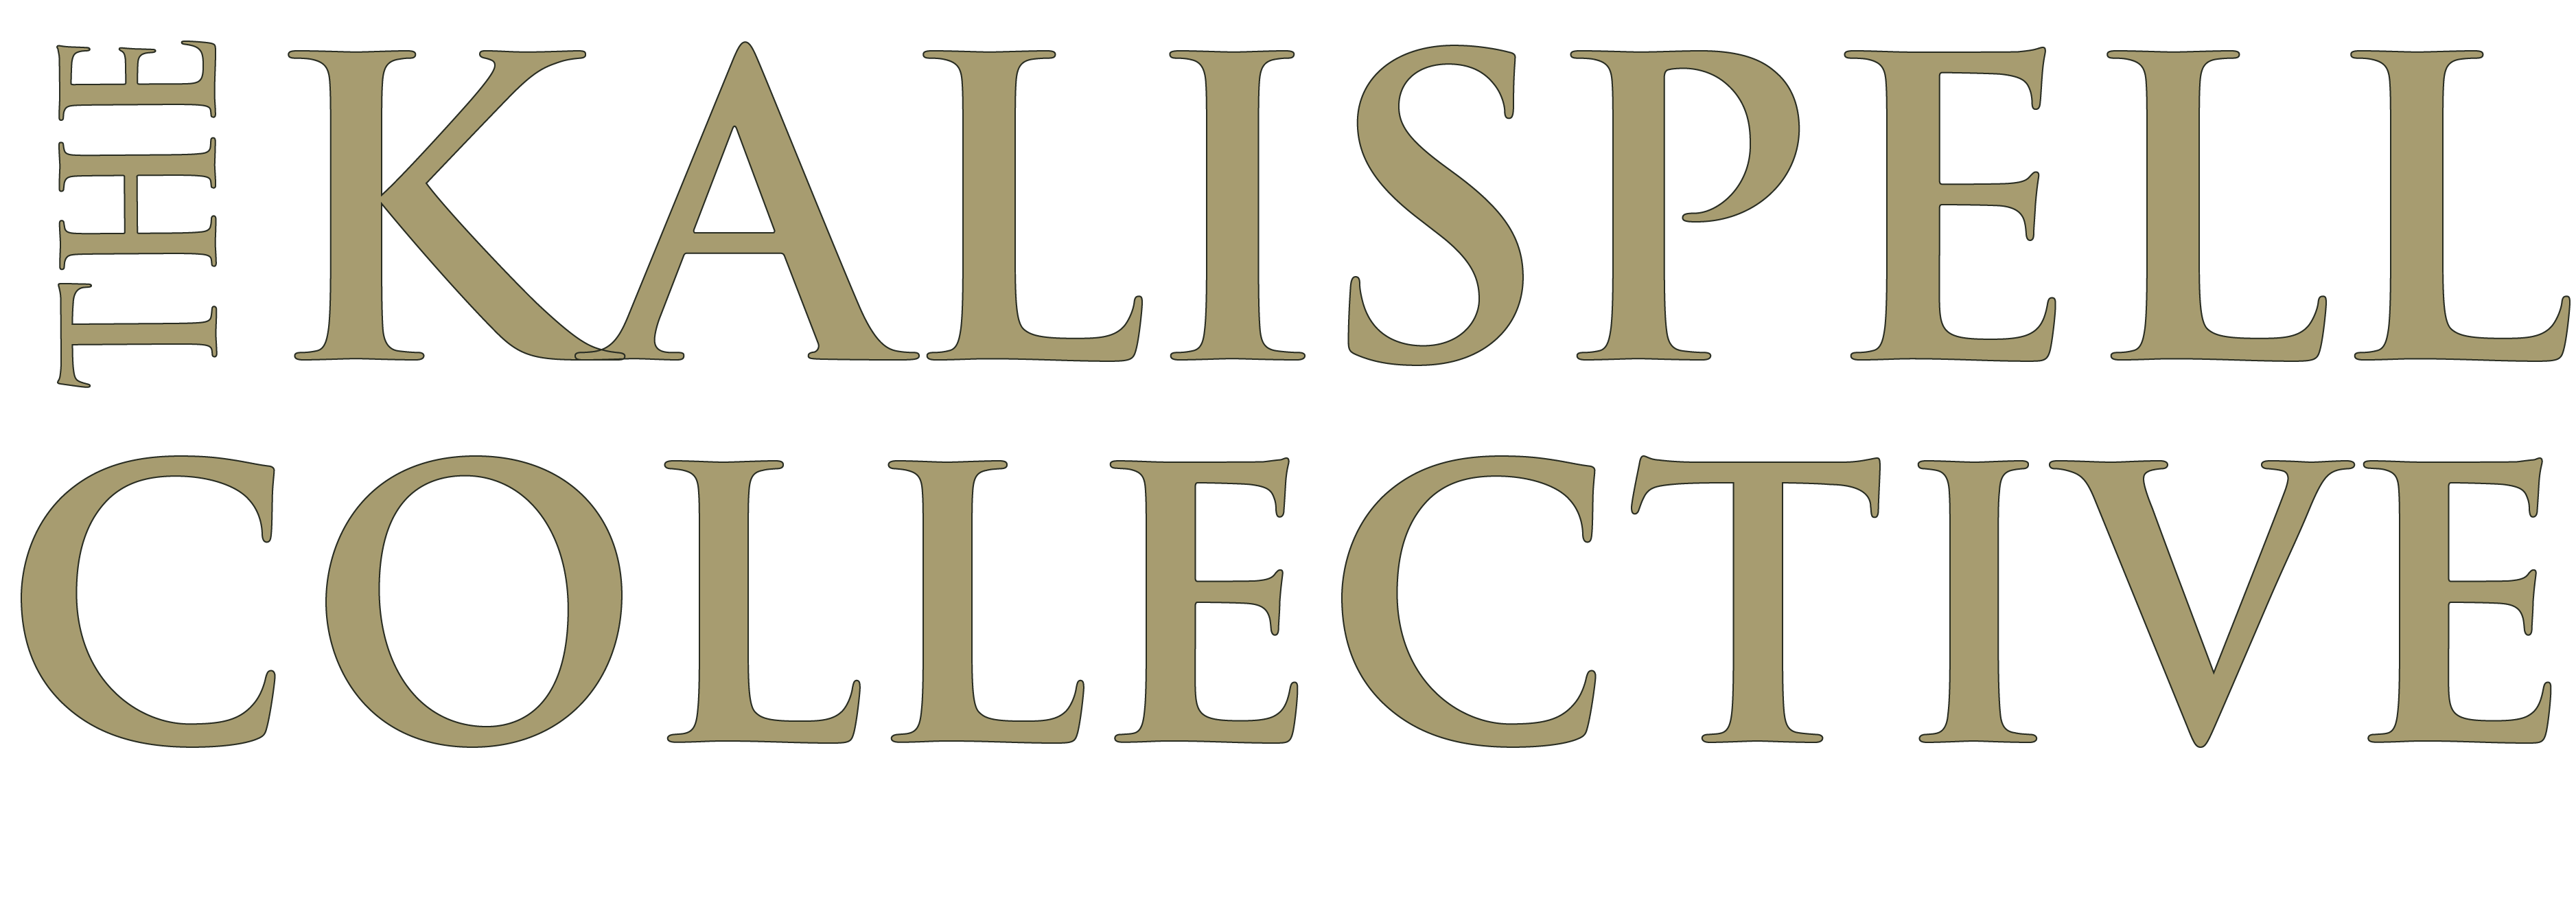 The Kalispell Collective